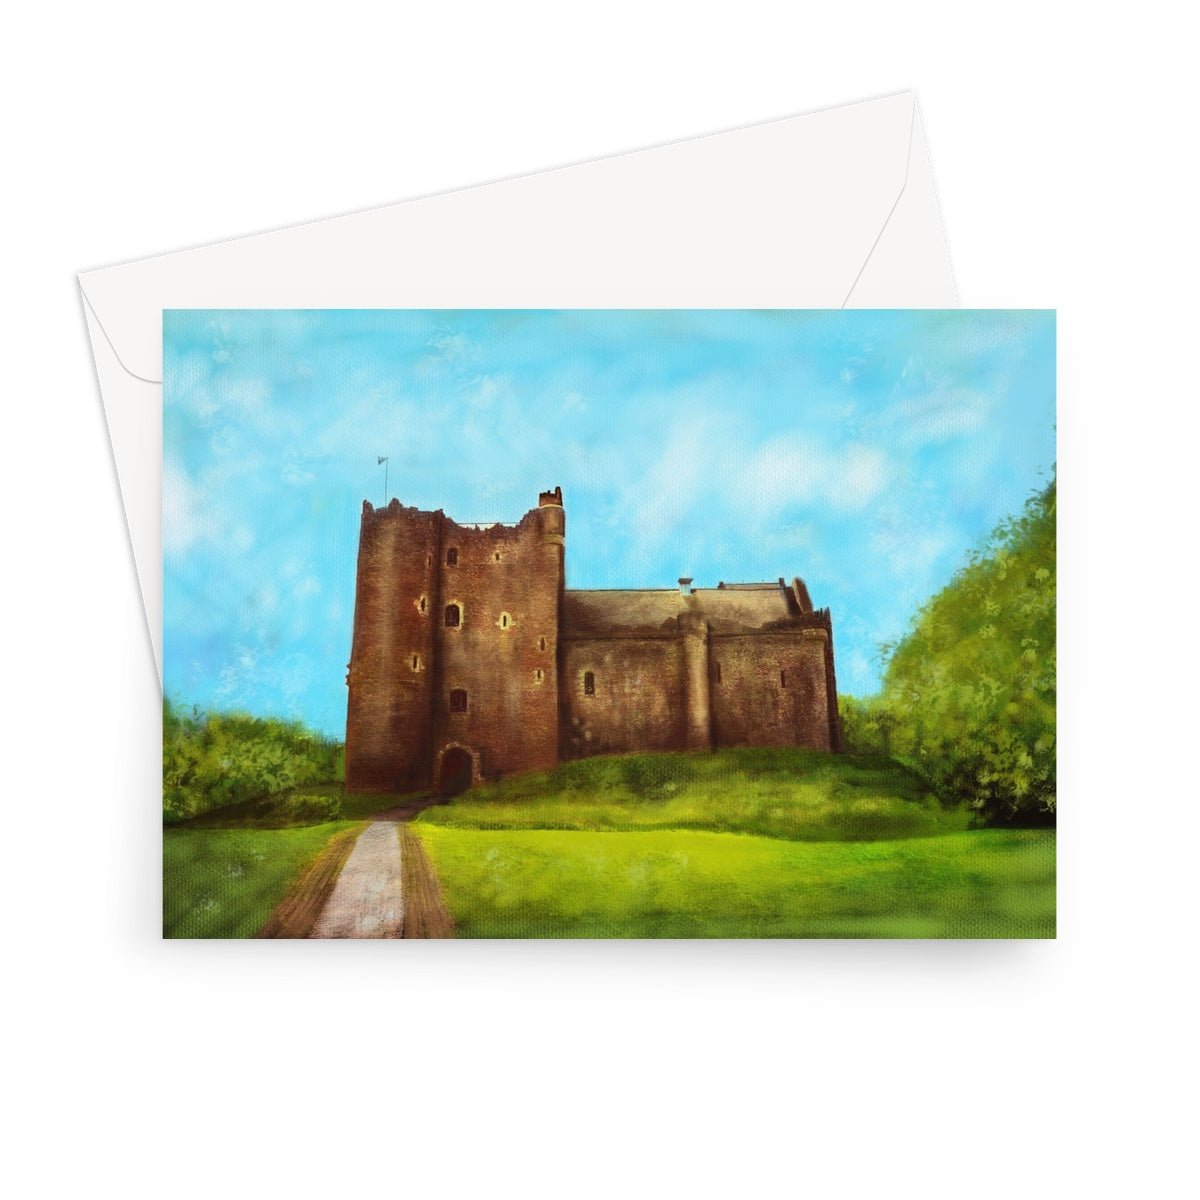 Doune Castle Art Gifts Greeting Card-Greetings Cards-Scottish Castles Art Gallery-7"x5"-1 Card-Paintings, Prints, Homeware, Art Gifts From Scotland By Scottish Artist Kevin Hunter